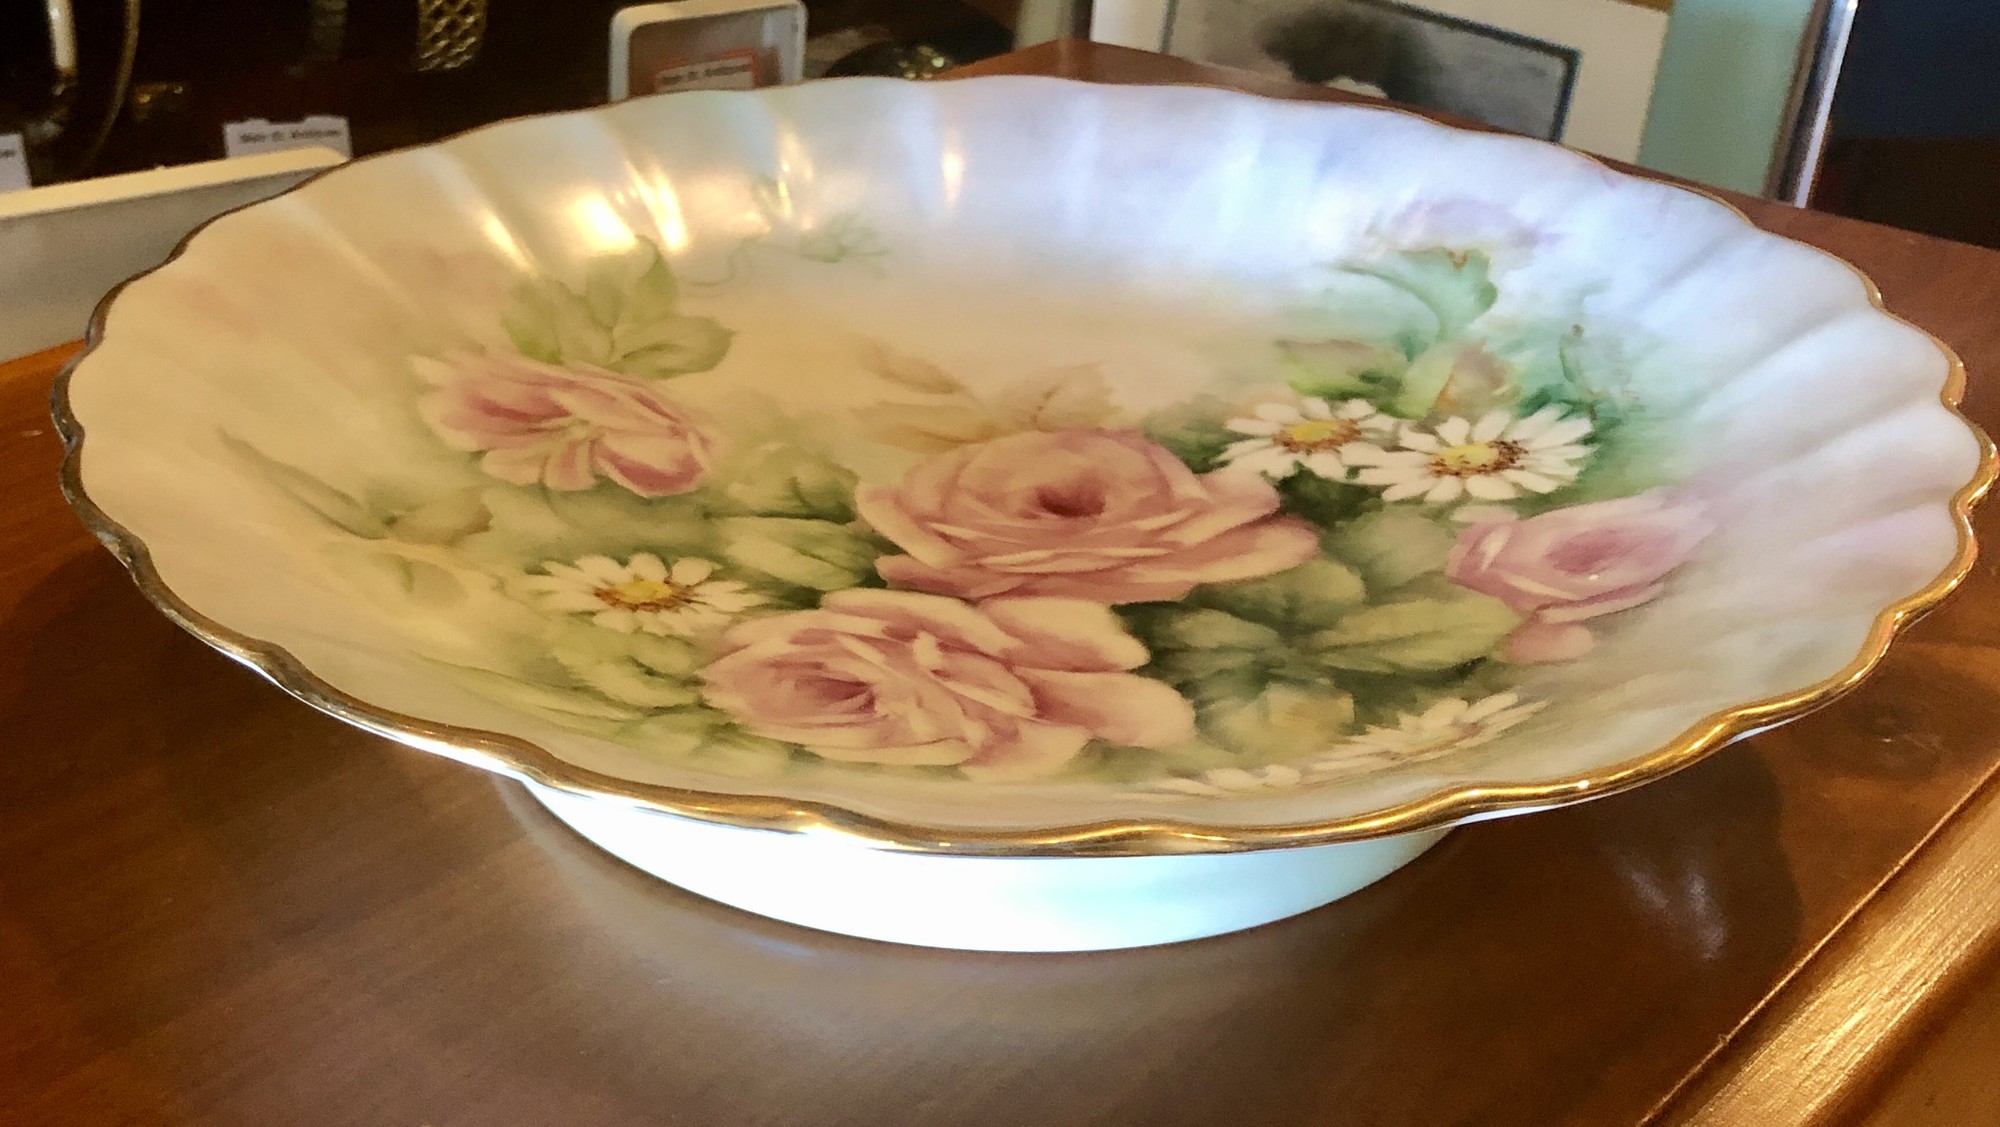 Bavaria Cakeplate by Johann Seltmann. This footed cakeplate has a beautiful hand-painted floral design that would make a perfect mother's day gift. Size: 12in